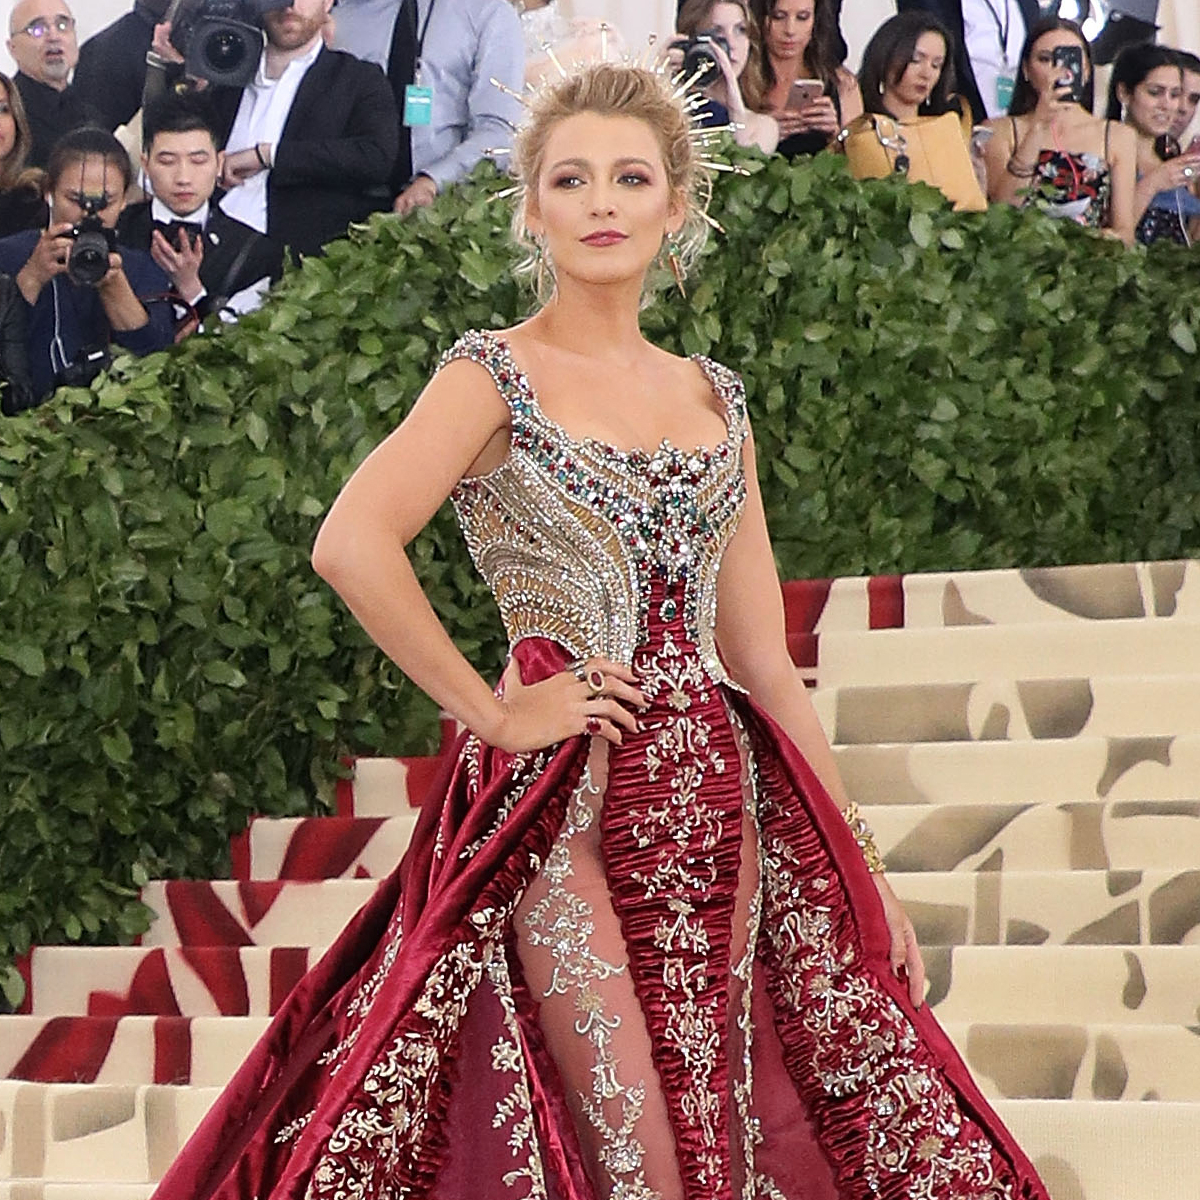 2022 Met Gala: What to Know, Date, Details, Hosts, Theme and More